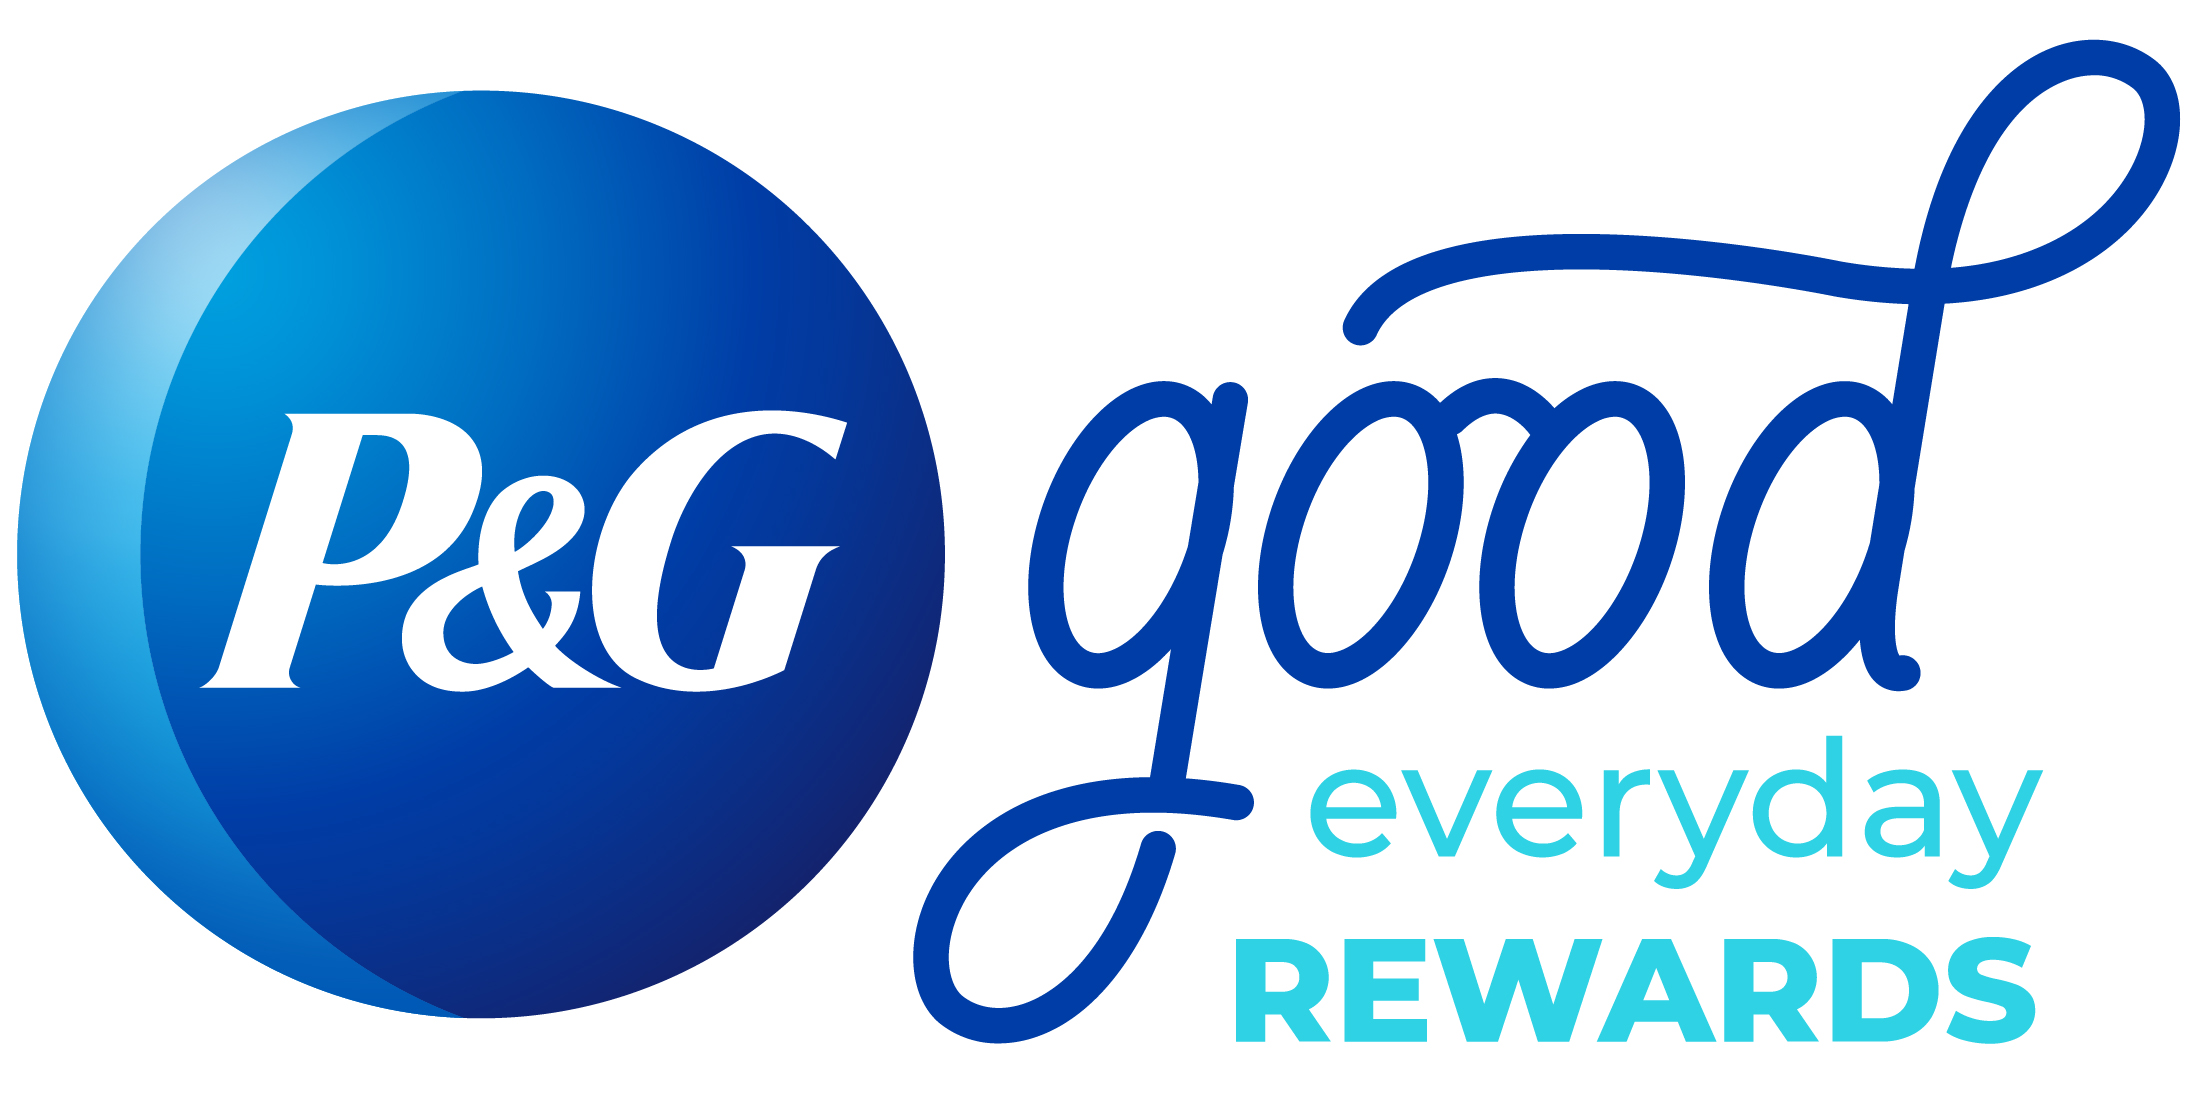 P&G Good Everyday Rewards, Sign Up & Use Points for Free Shutterfly 8x8 Photobook (Value $29.99)